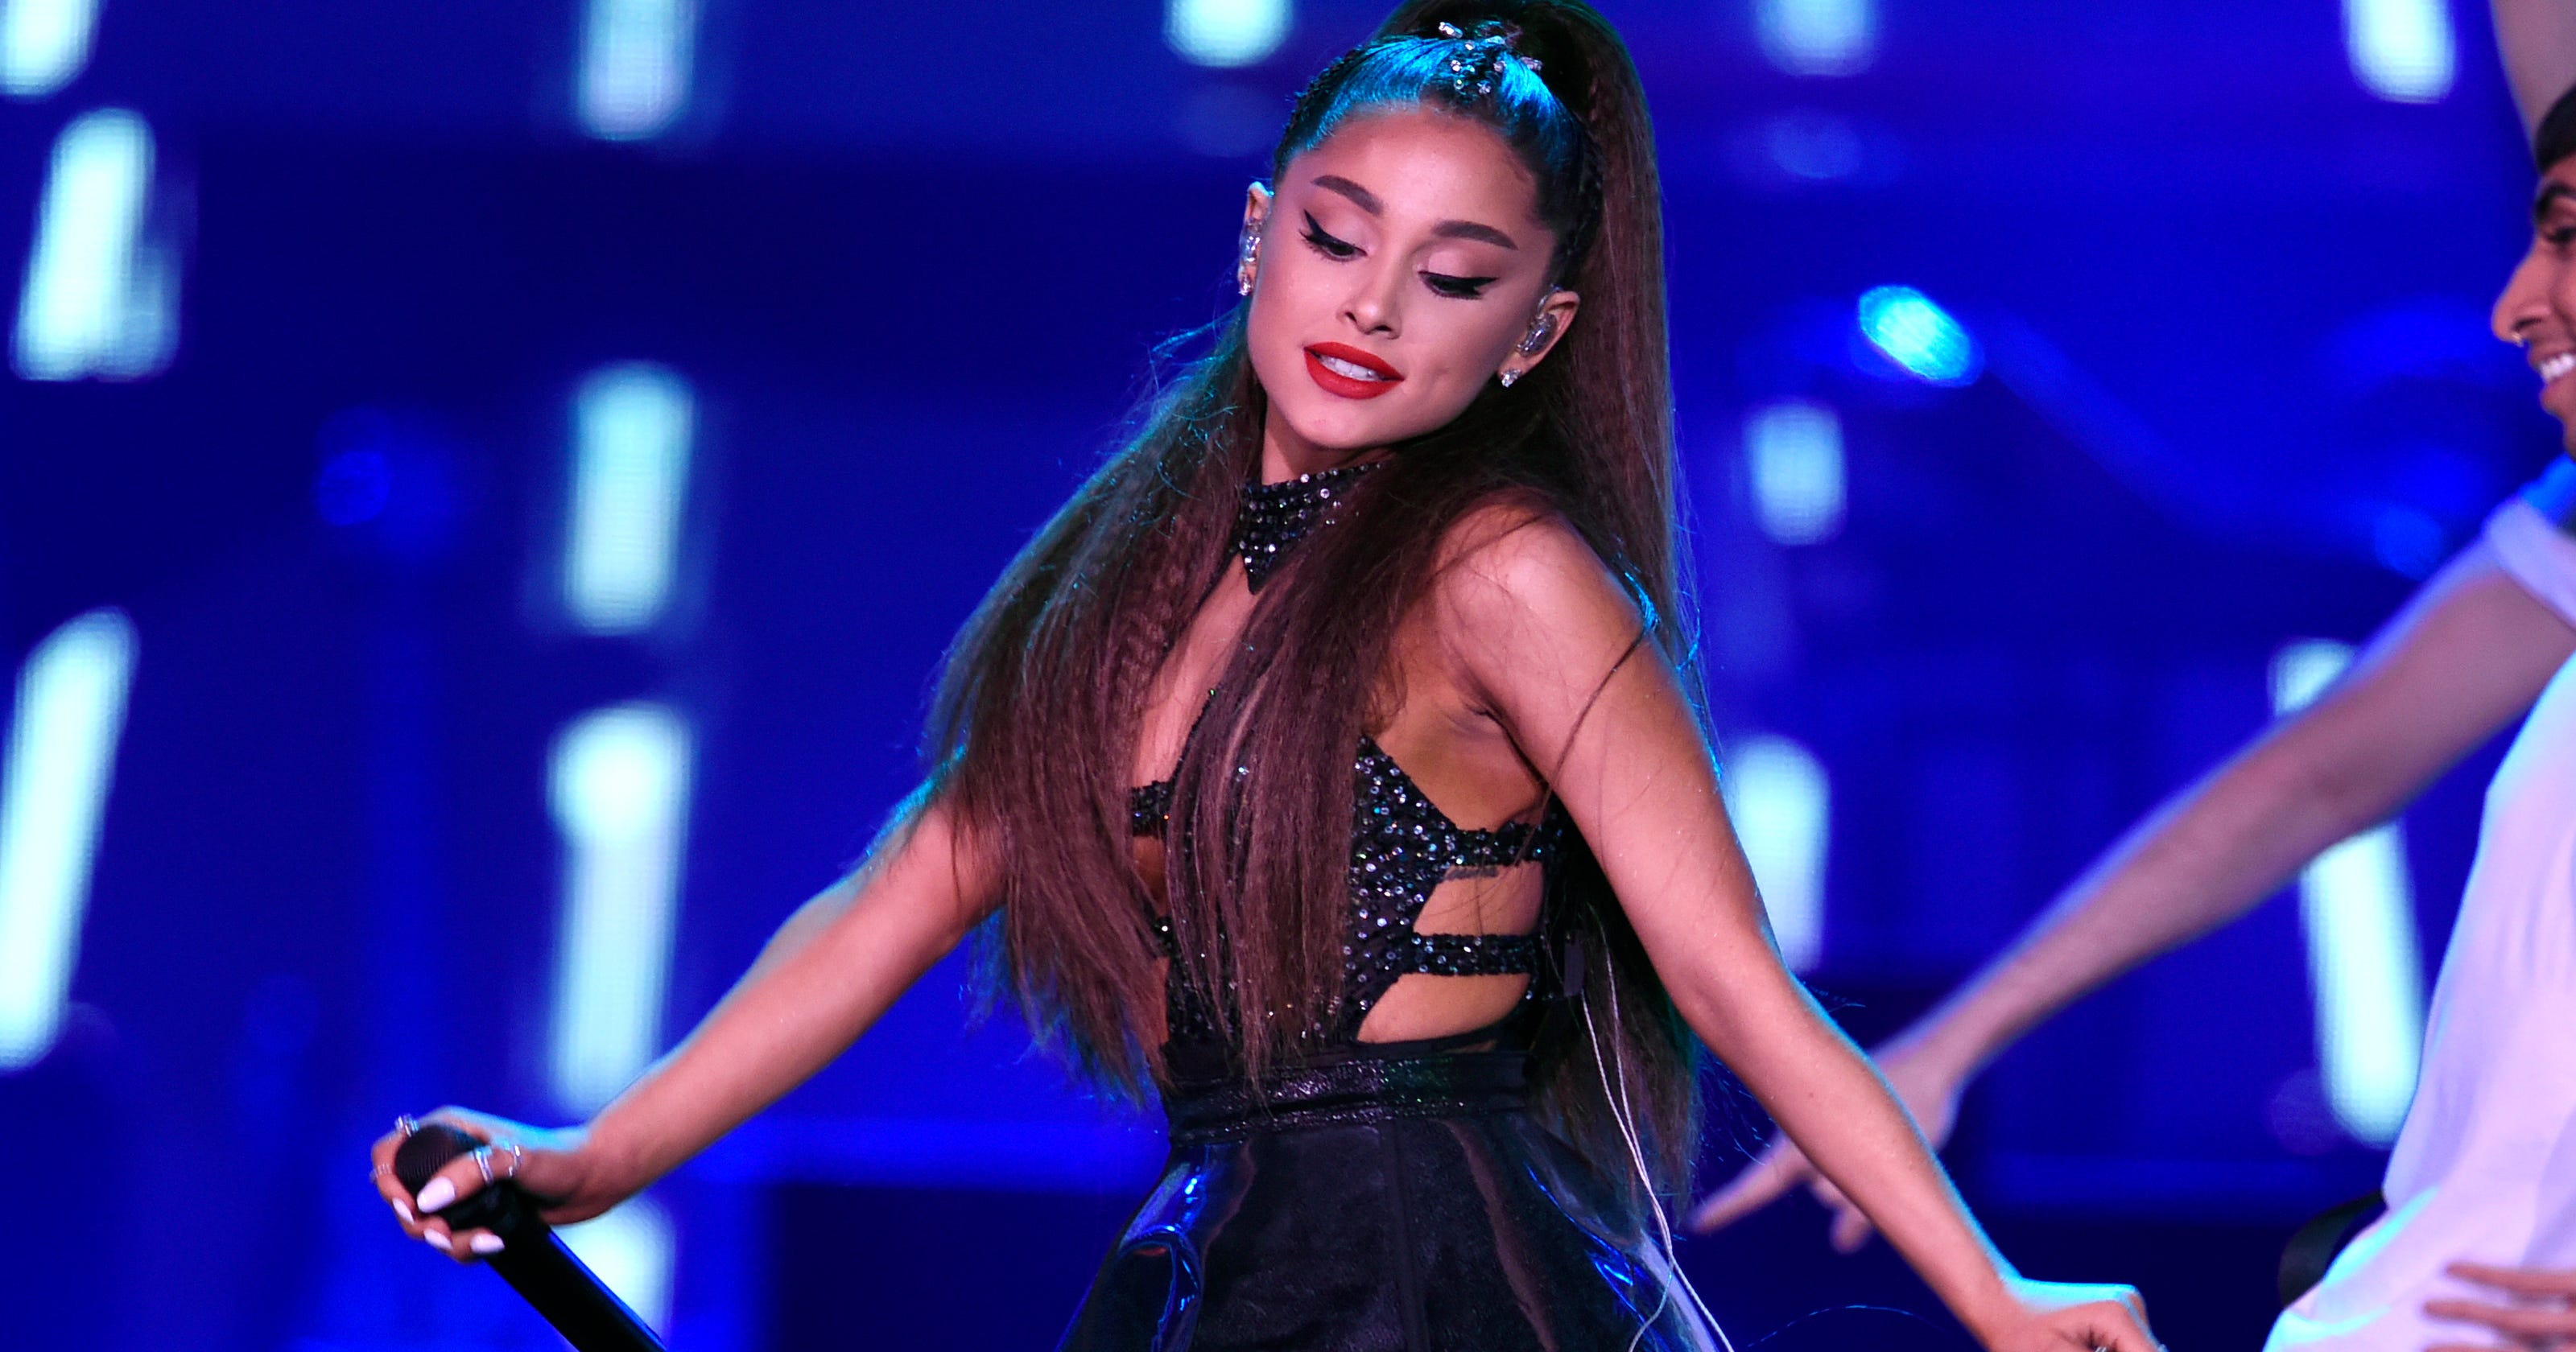 Ariana Grande Justice Sex Tape - Ariana Grande bisexual?' That question is problematic to ...